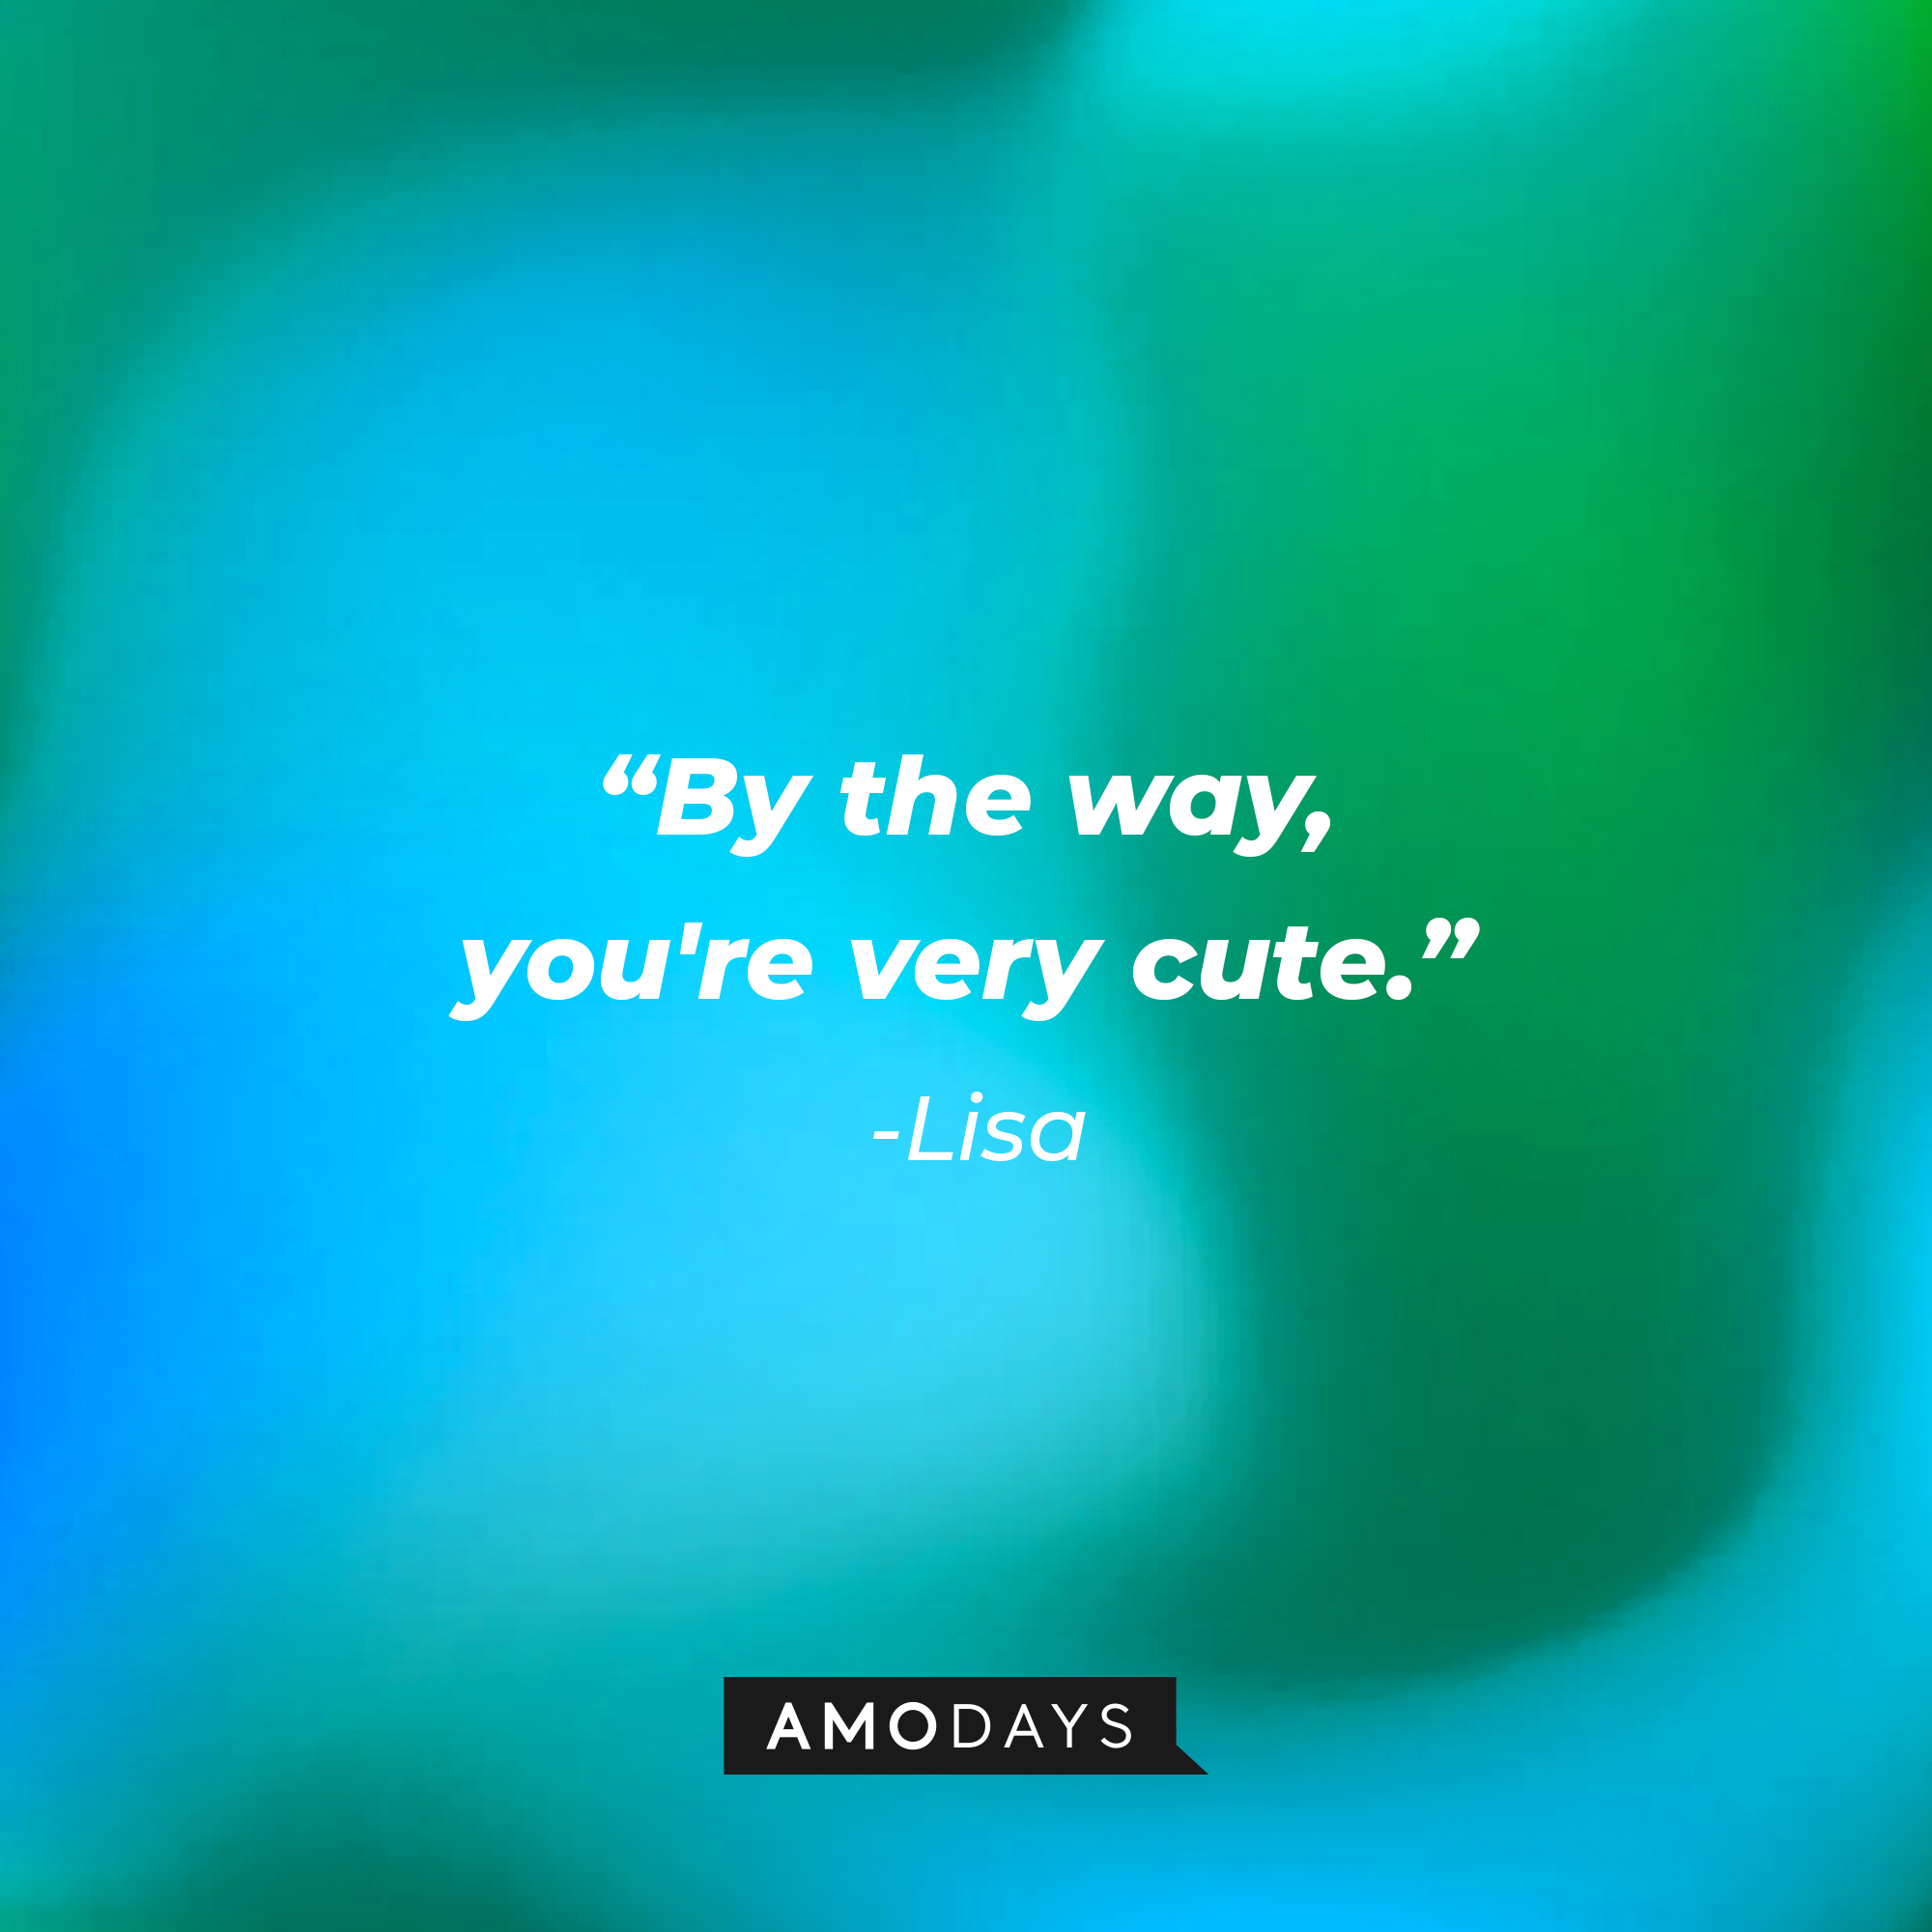 Lisa’s quote: “By the way, you're very cute.” | Source: AmoDays